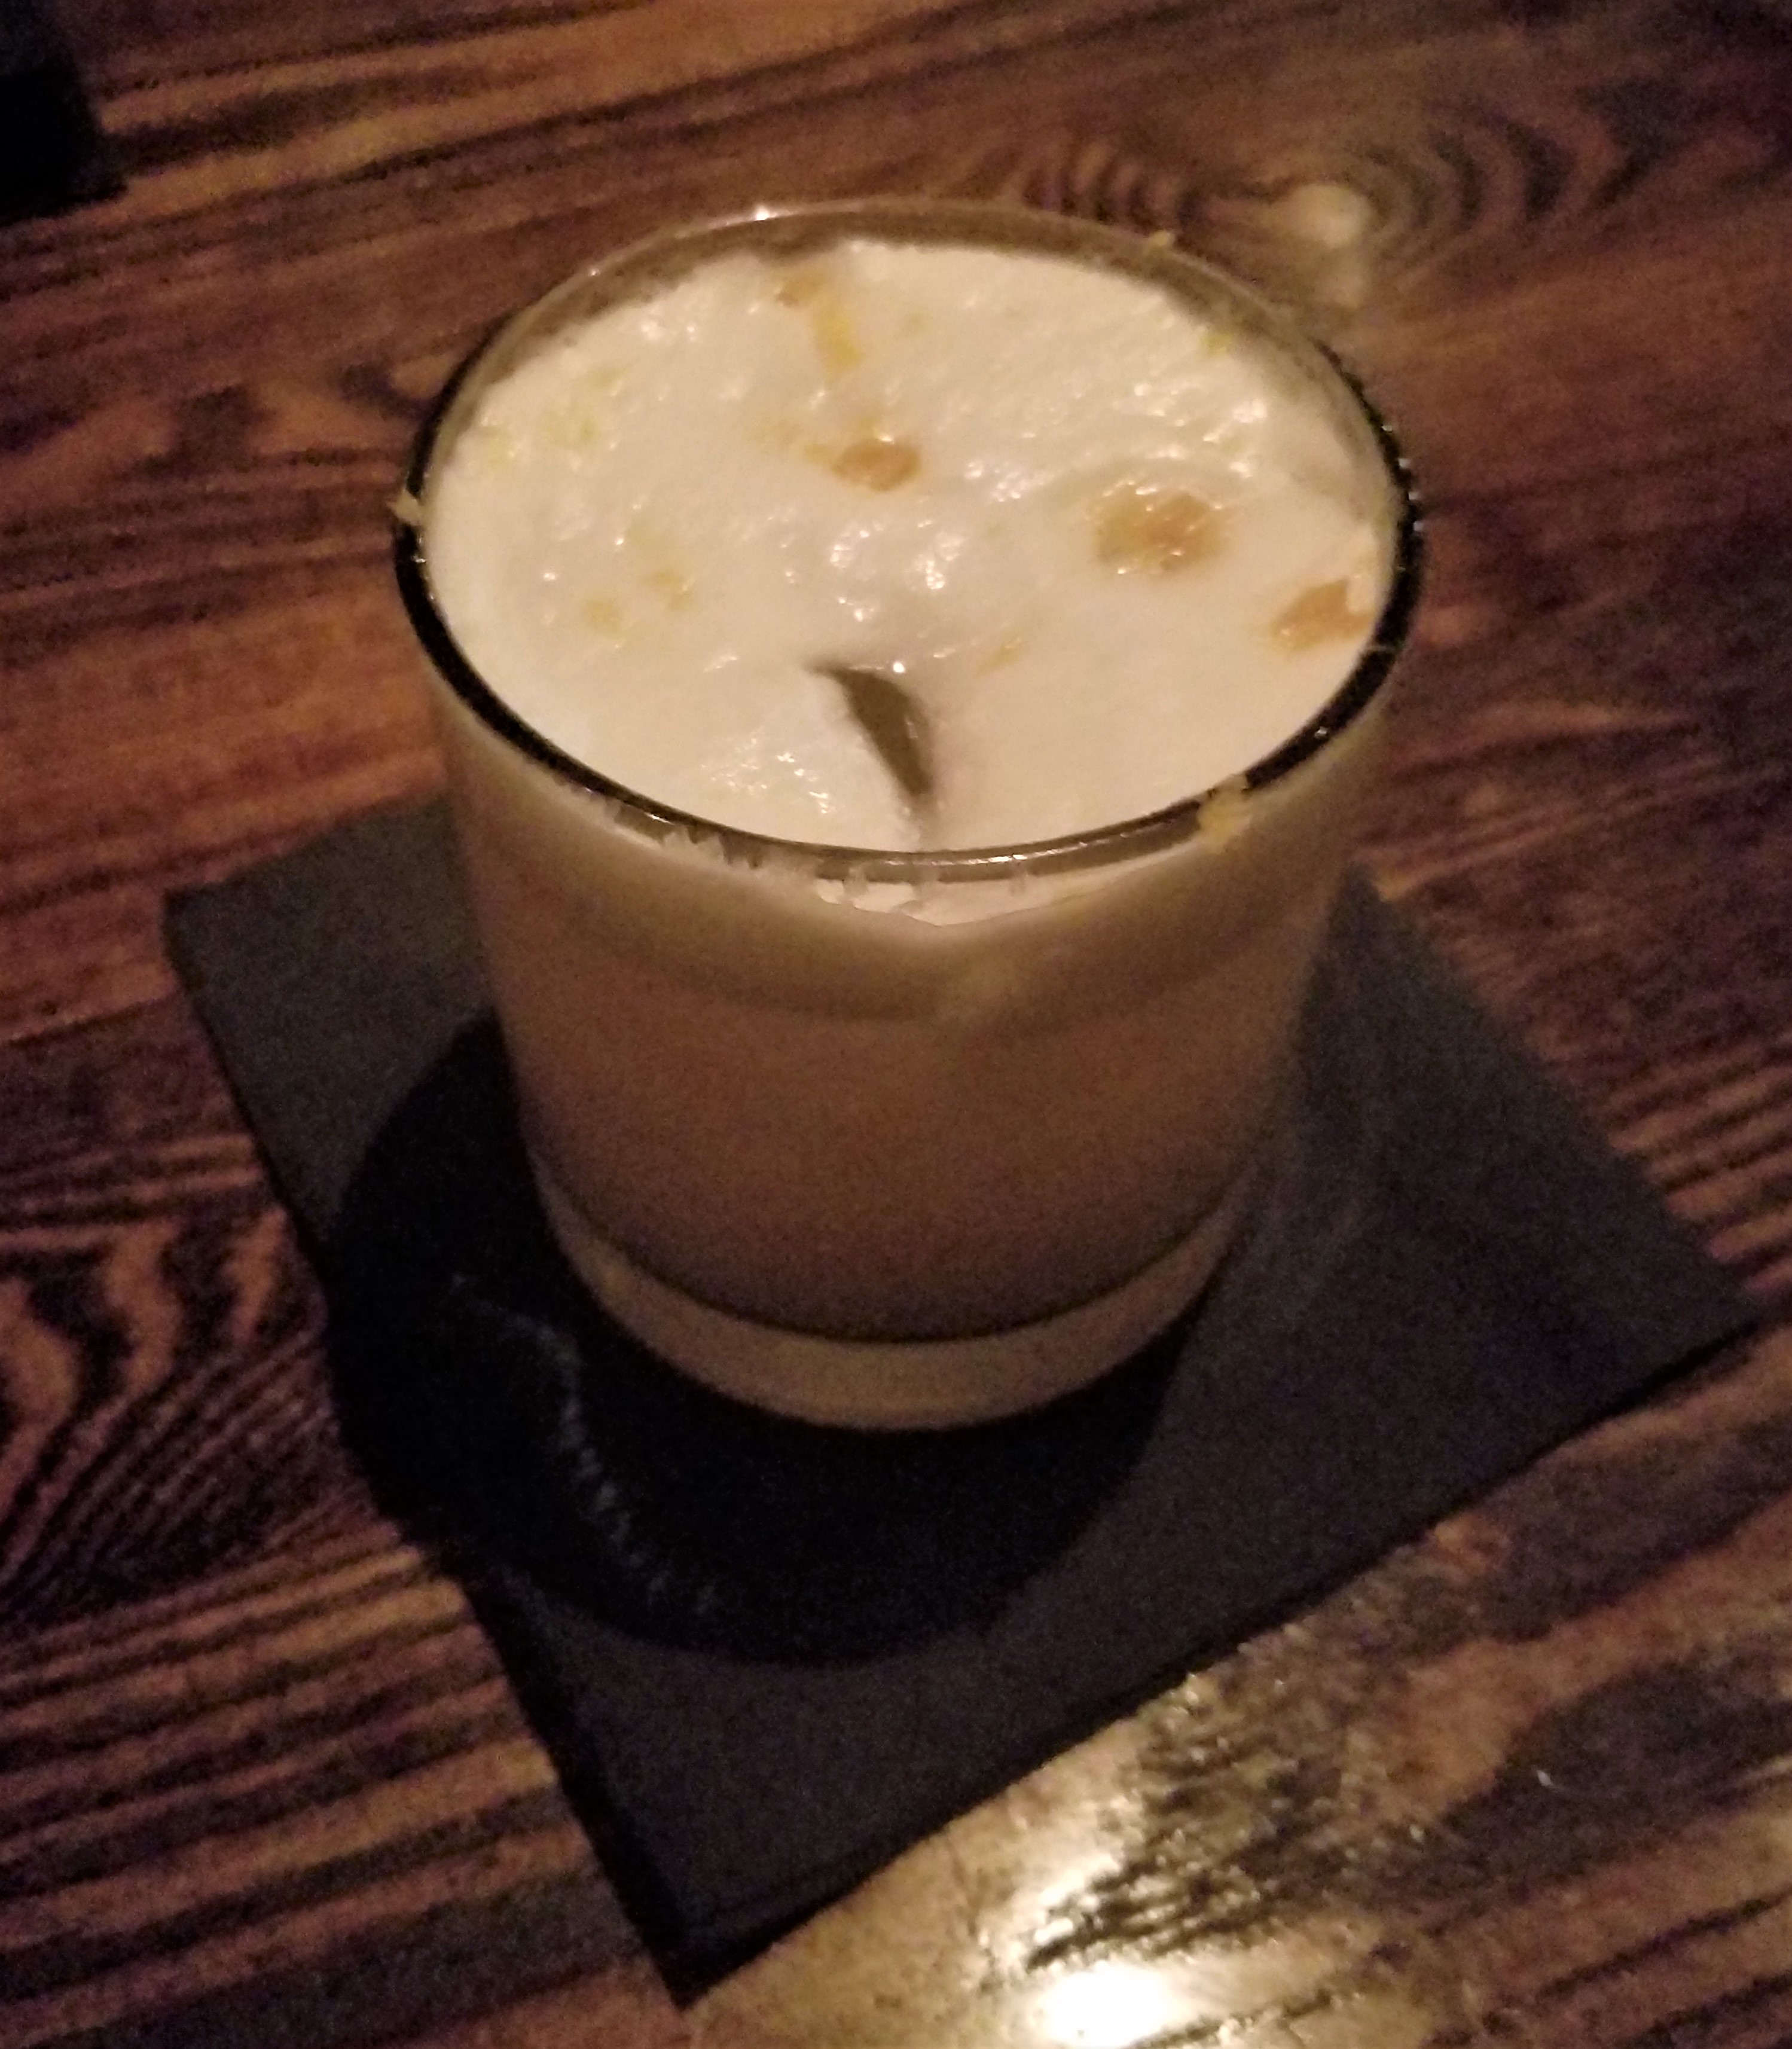 Ginger whiskey sour at Second Story Old Town Scottsdale